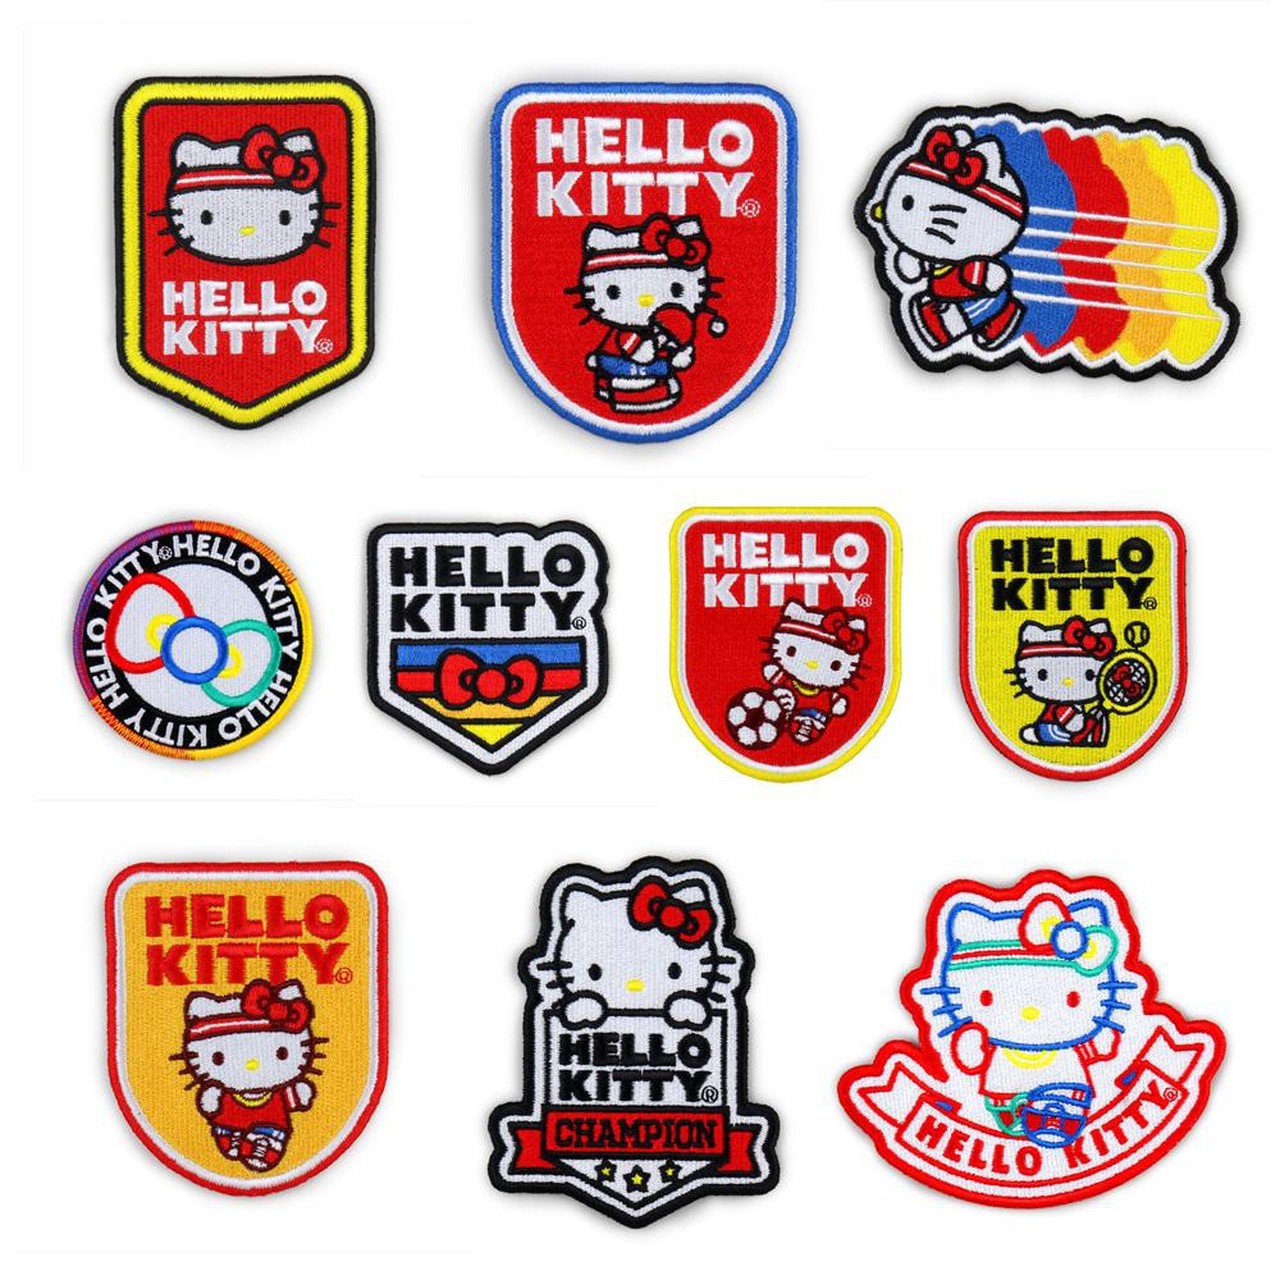 Hello Kitty - Hello Kitty - V- Patch - Back Patches - Patch Keychains  Stickers -  - Biggest Patch Shop worldwide